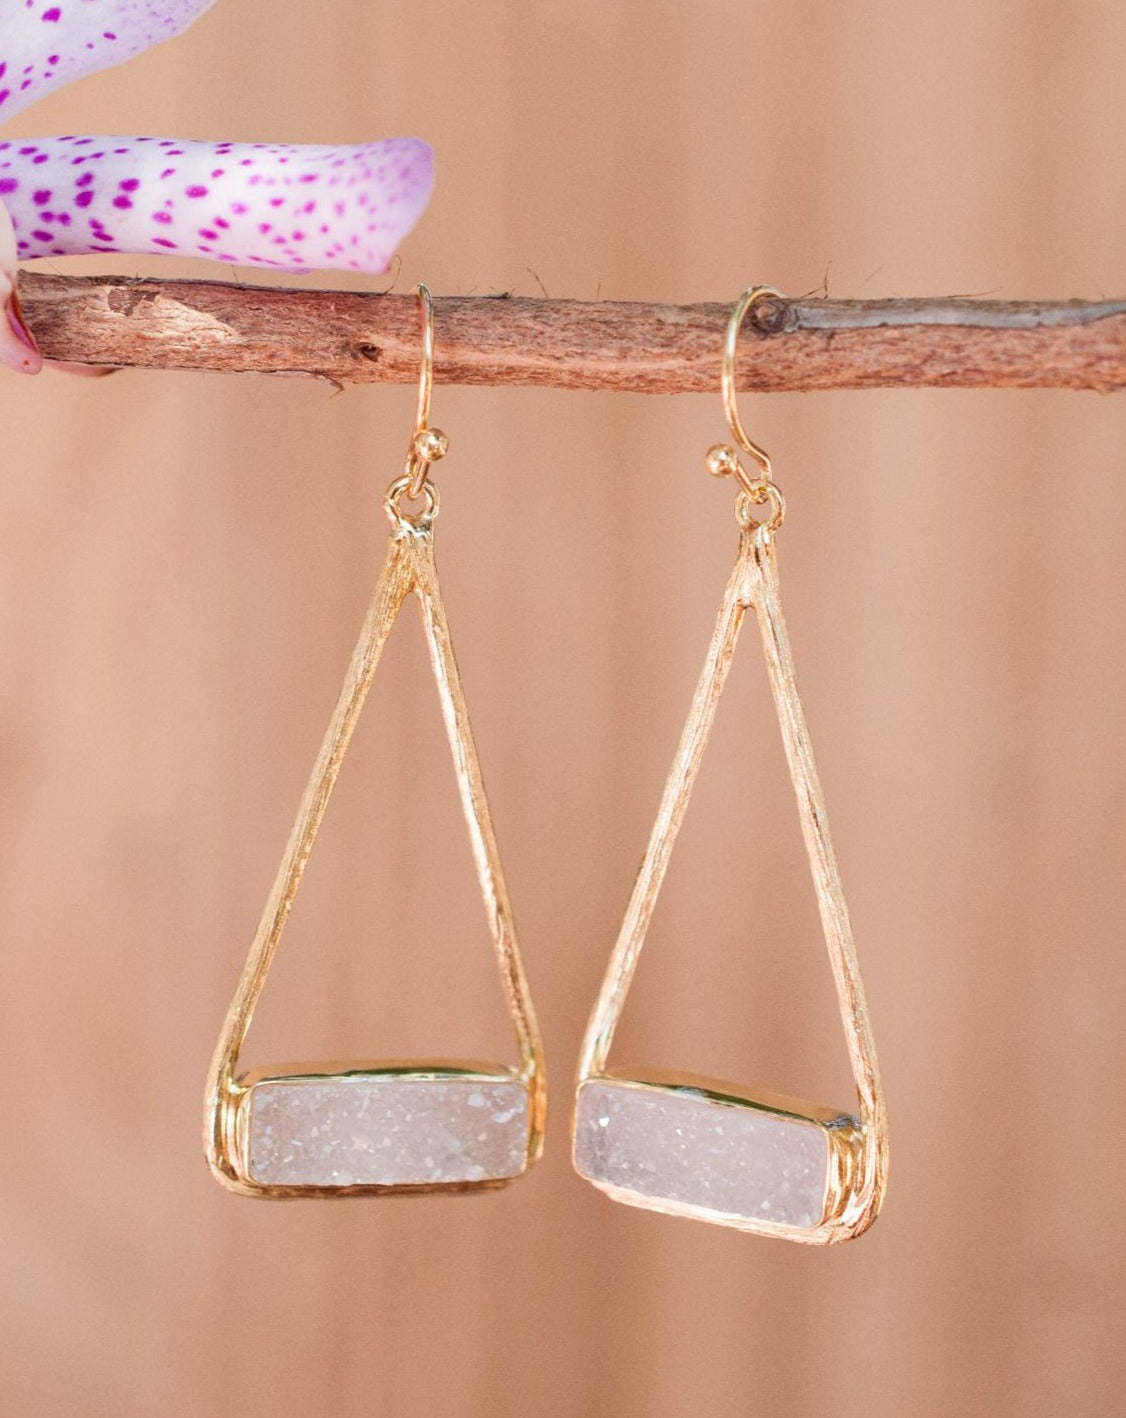 Marina Earrings * White Druzy * Gold Plated 18k or Silver Plated * BJE007A